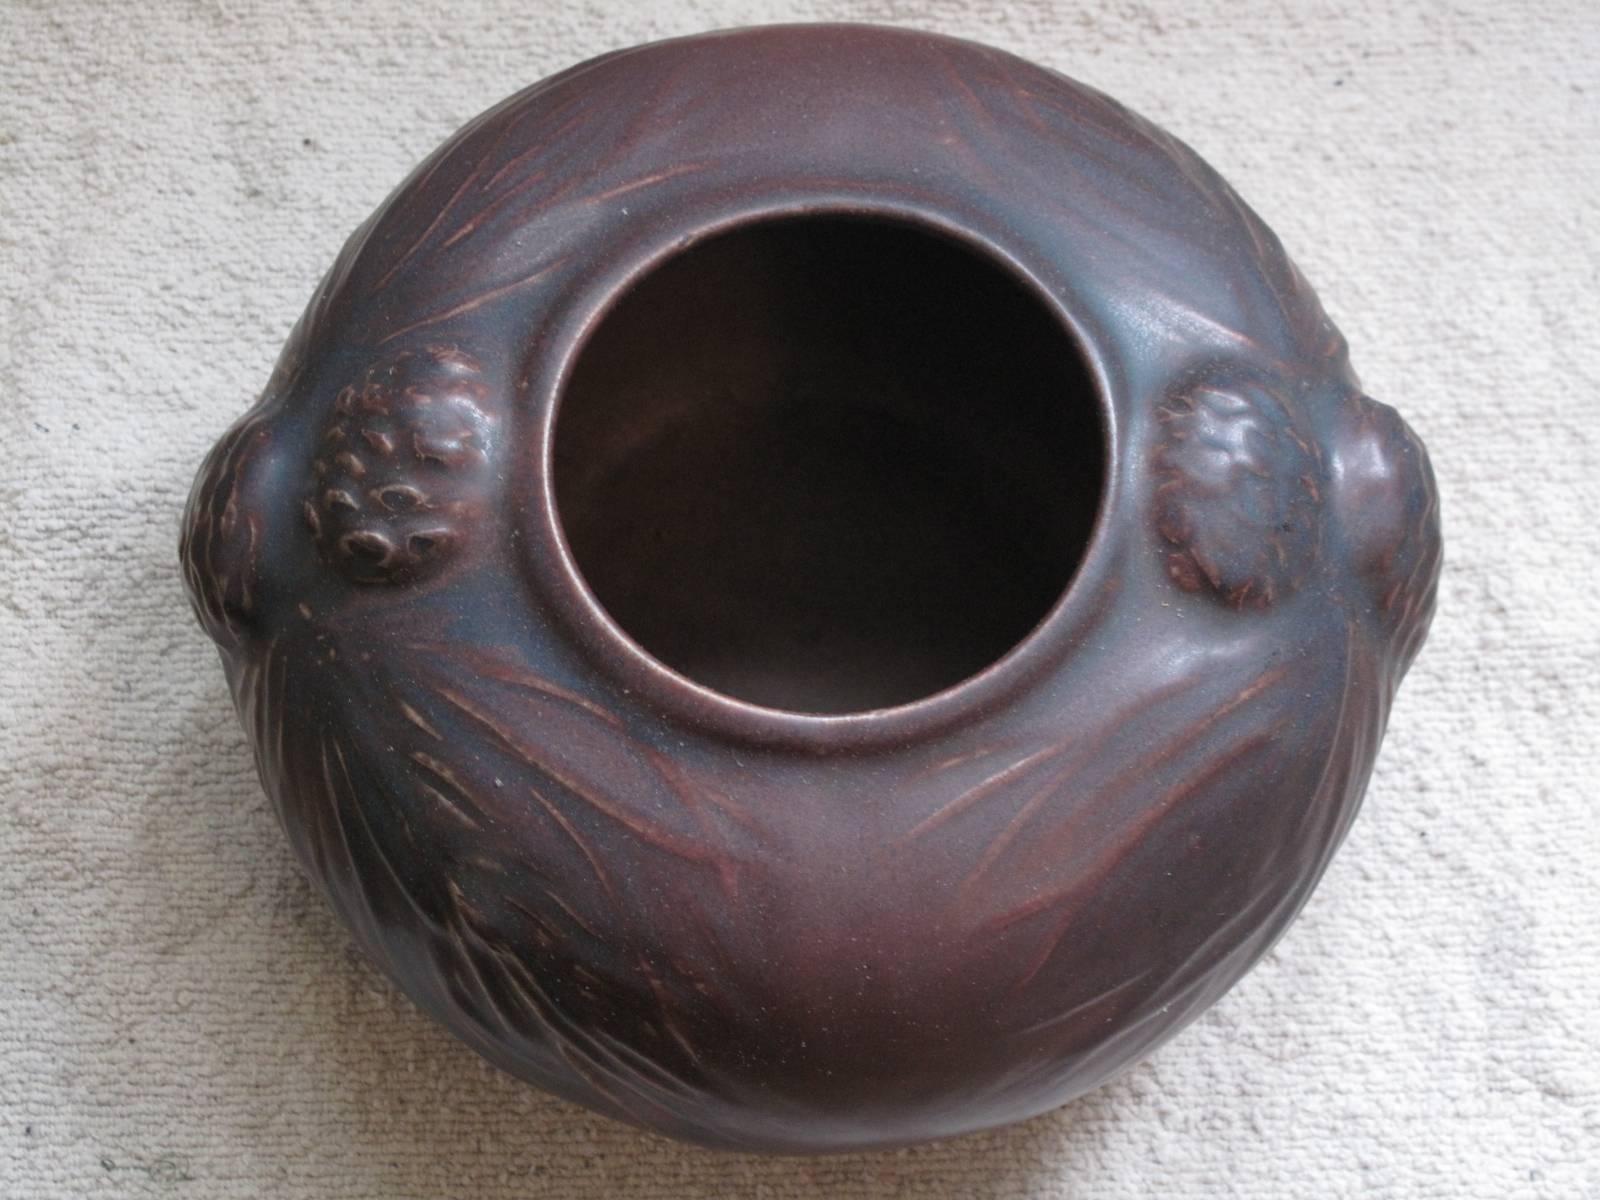 Pinecone pot in plum glaze by American Arts & Crafts potter Artus Van Briggle. No apparent date, however four distinct hash marks appear below the Van Briggle mark on the base of the vase.